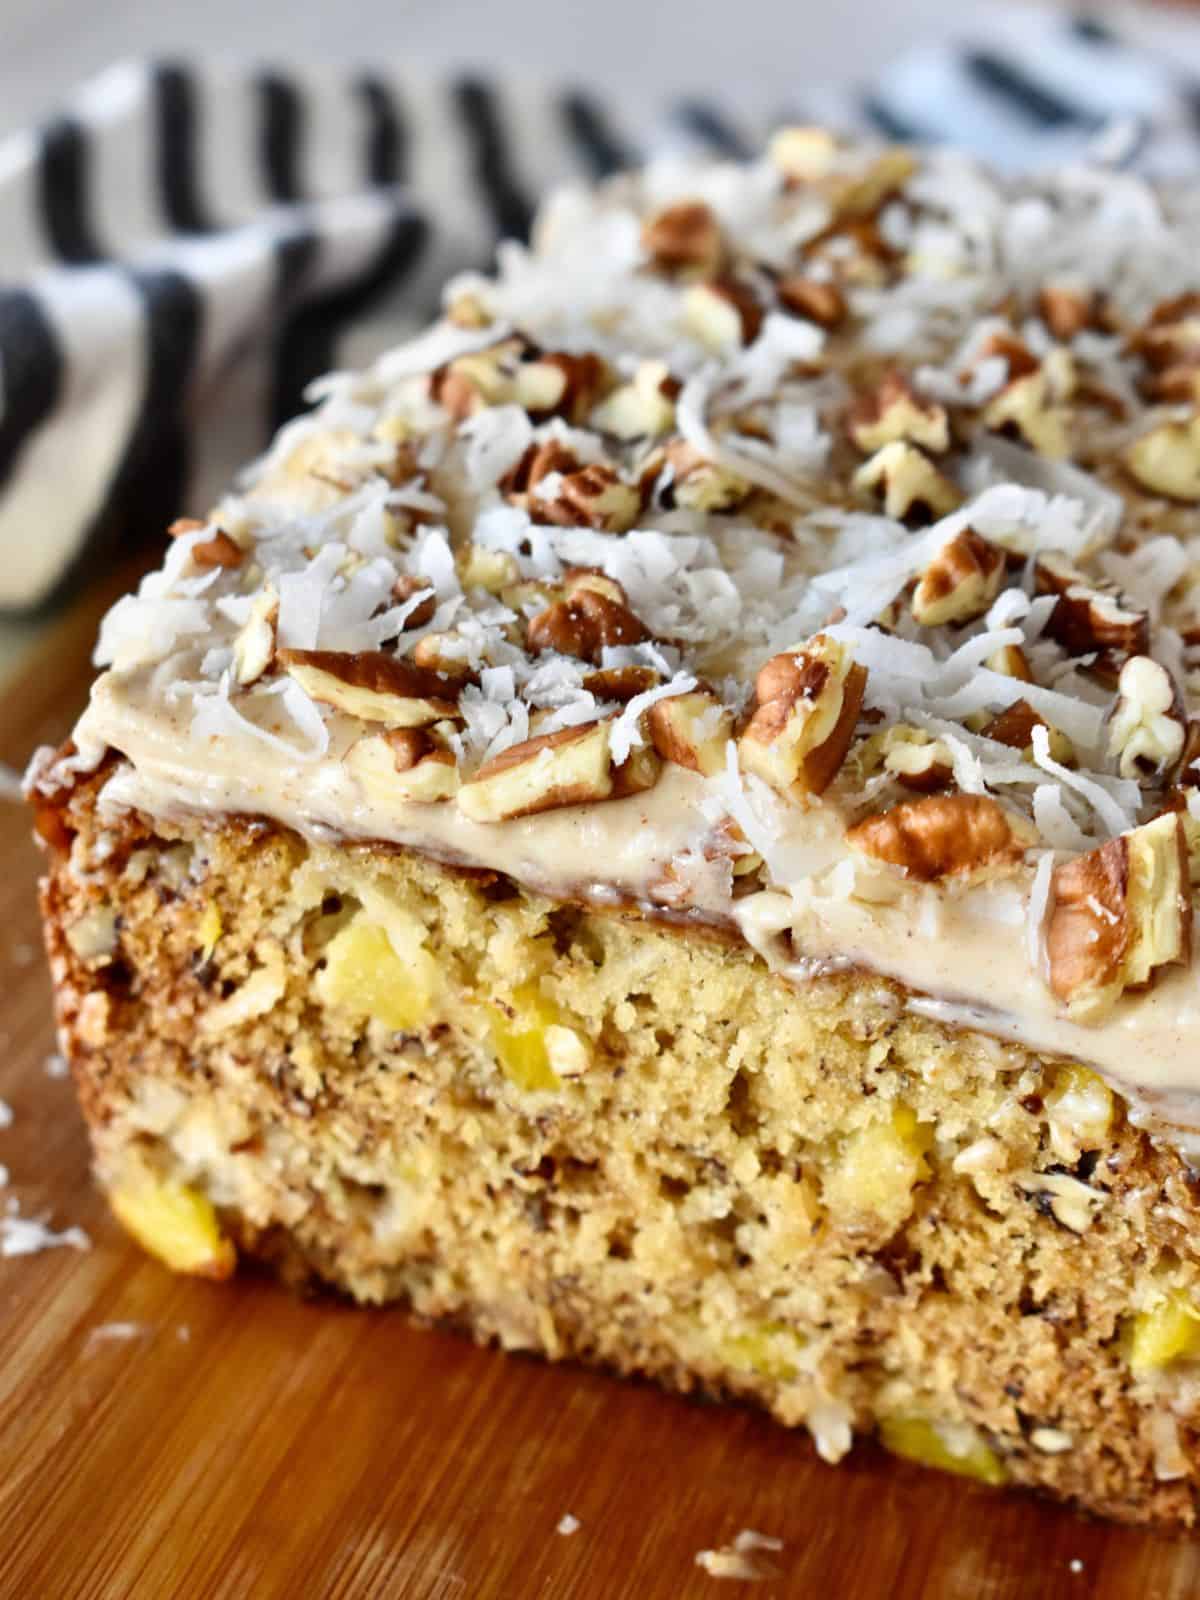 Hummingbird Bread with Cream Cheese frosting made with pineapple, pecans, bananas, and coconut.